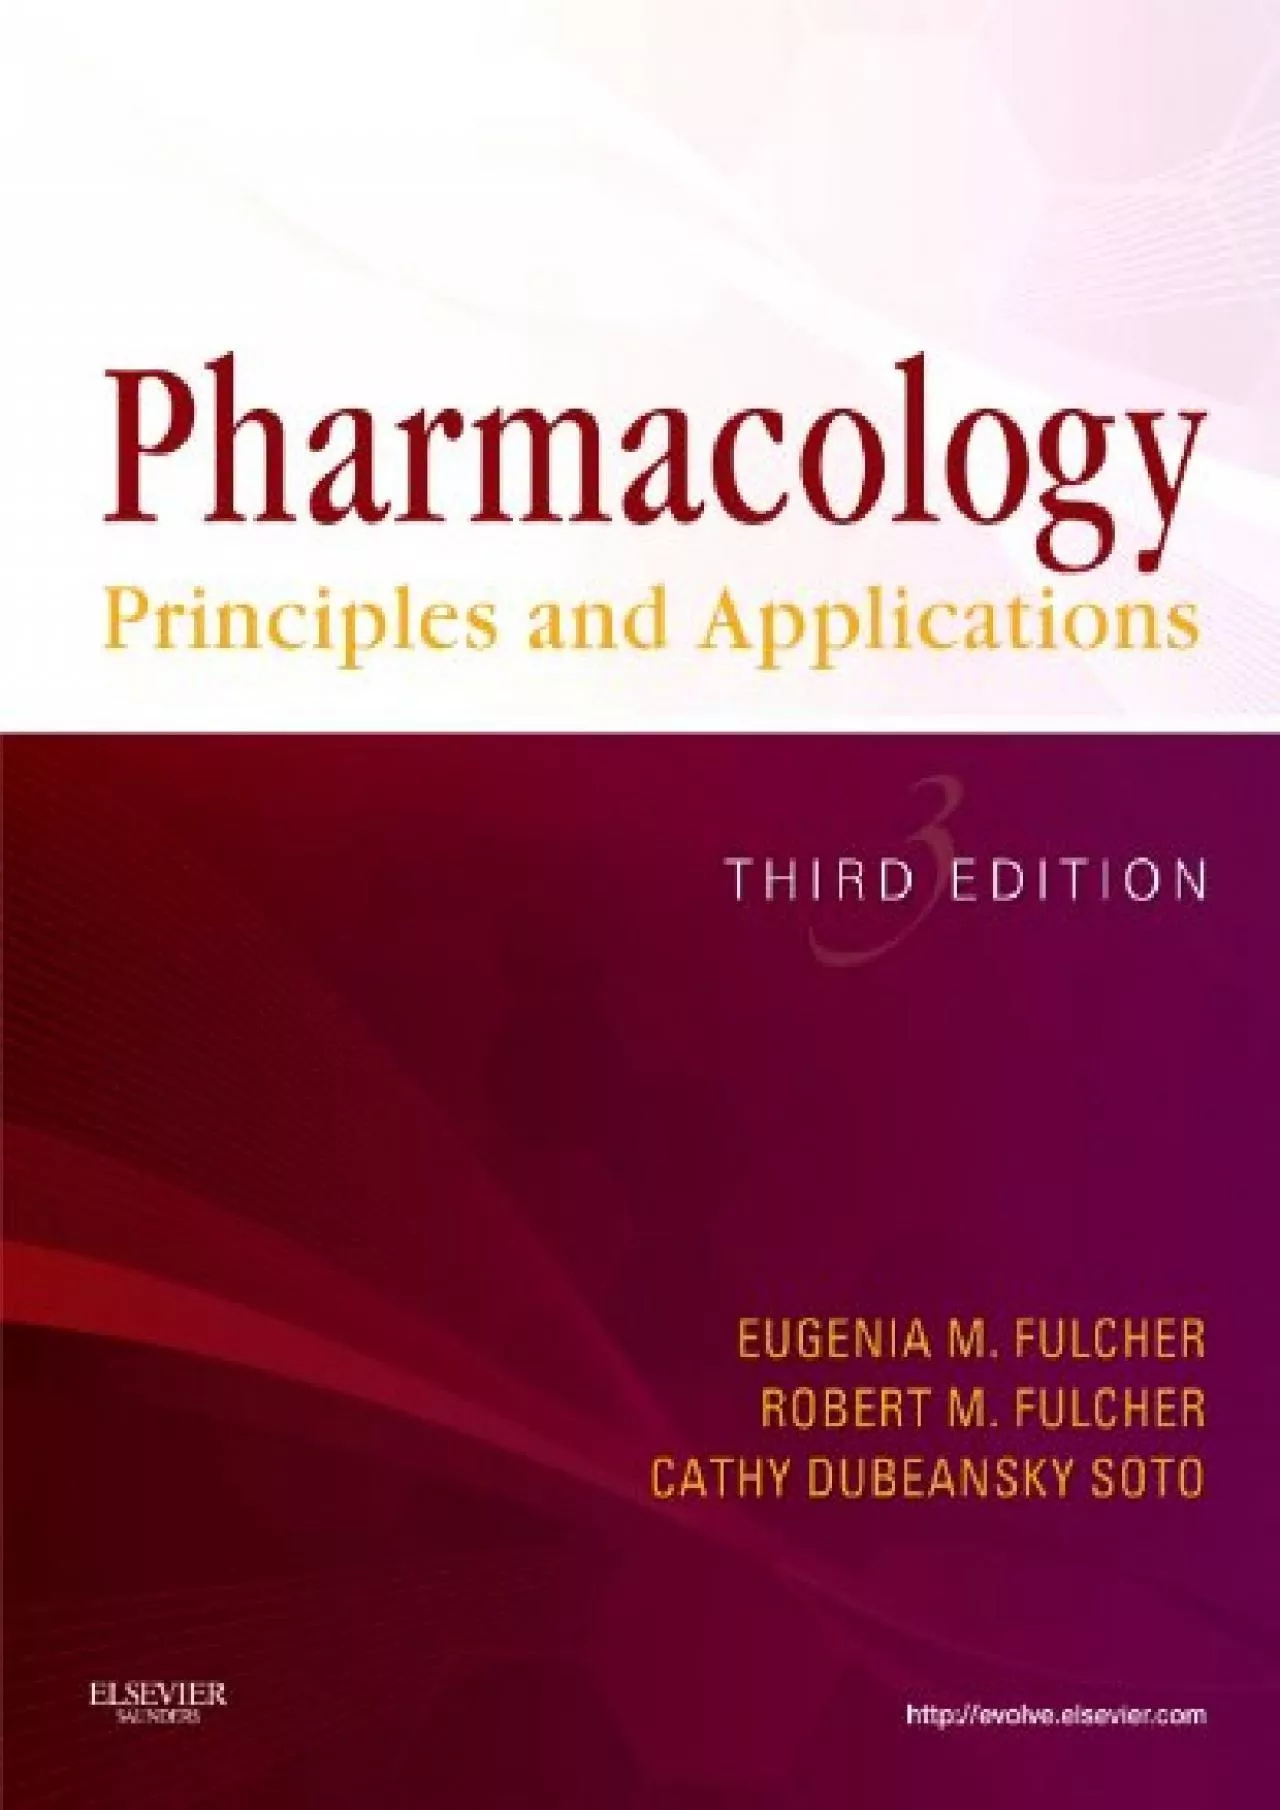 (BOOK)-Pharmacology